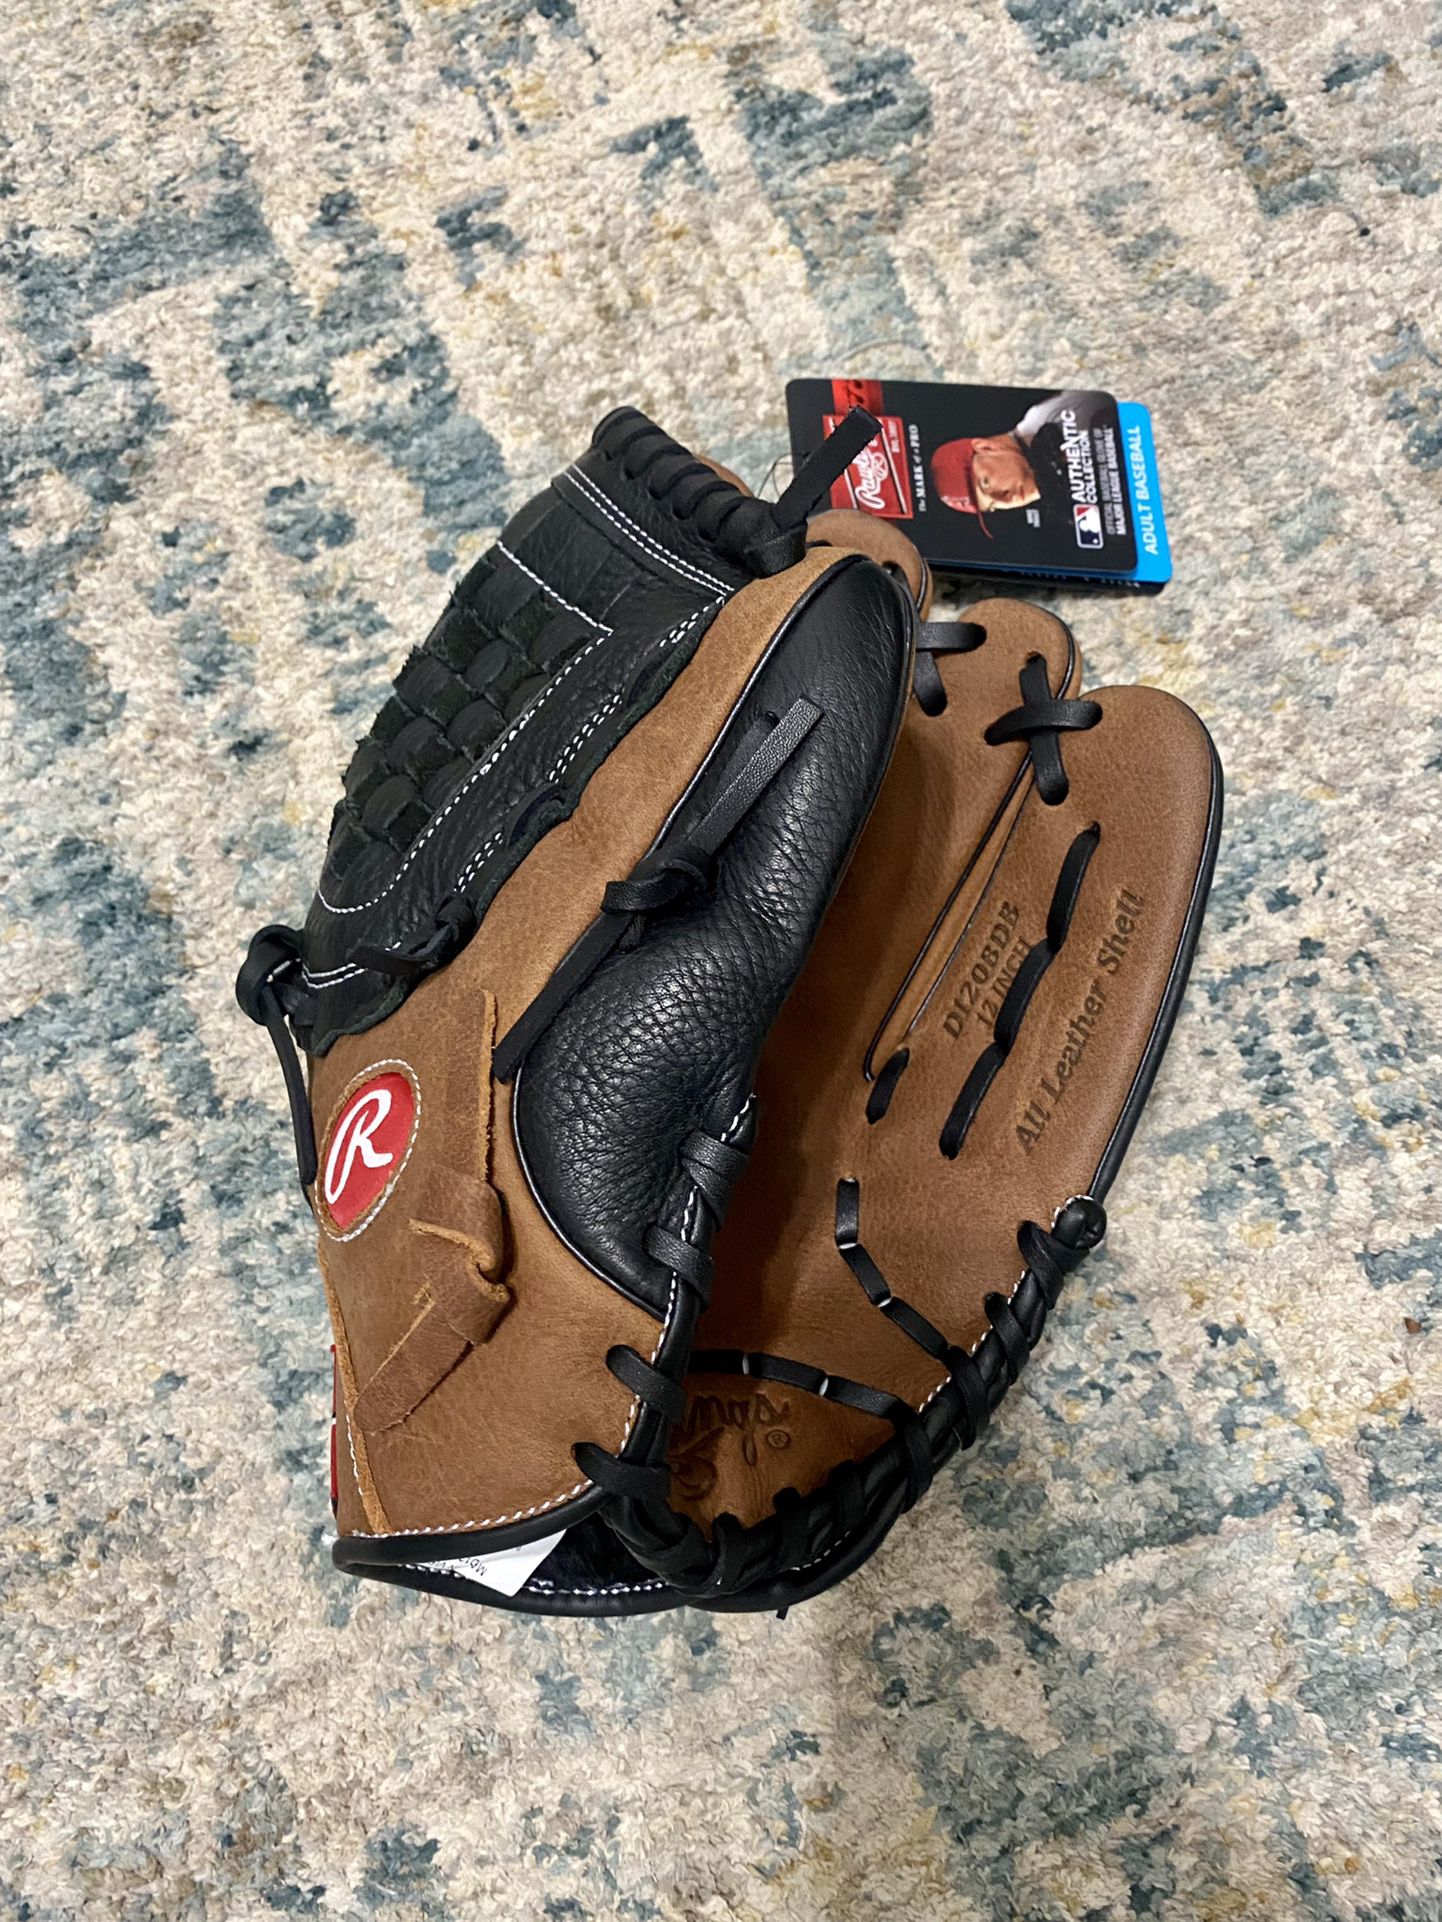 Rawlings Baseball Glove “Authentic Collection”